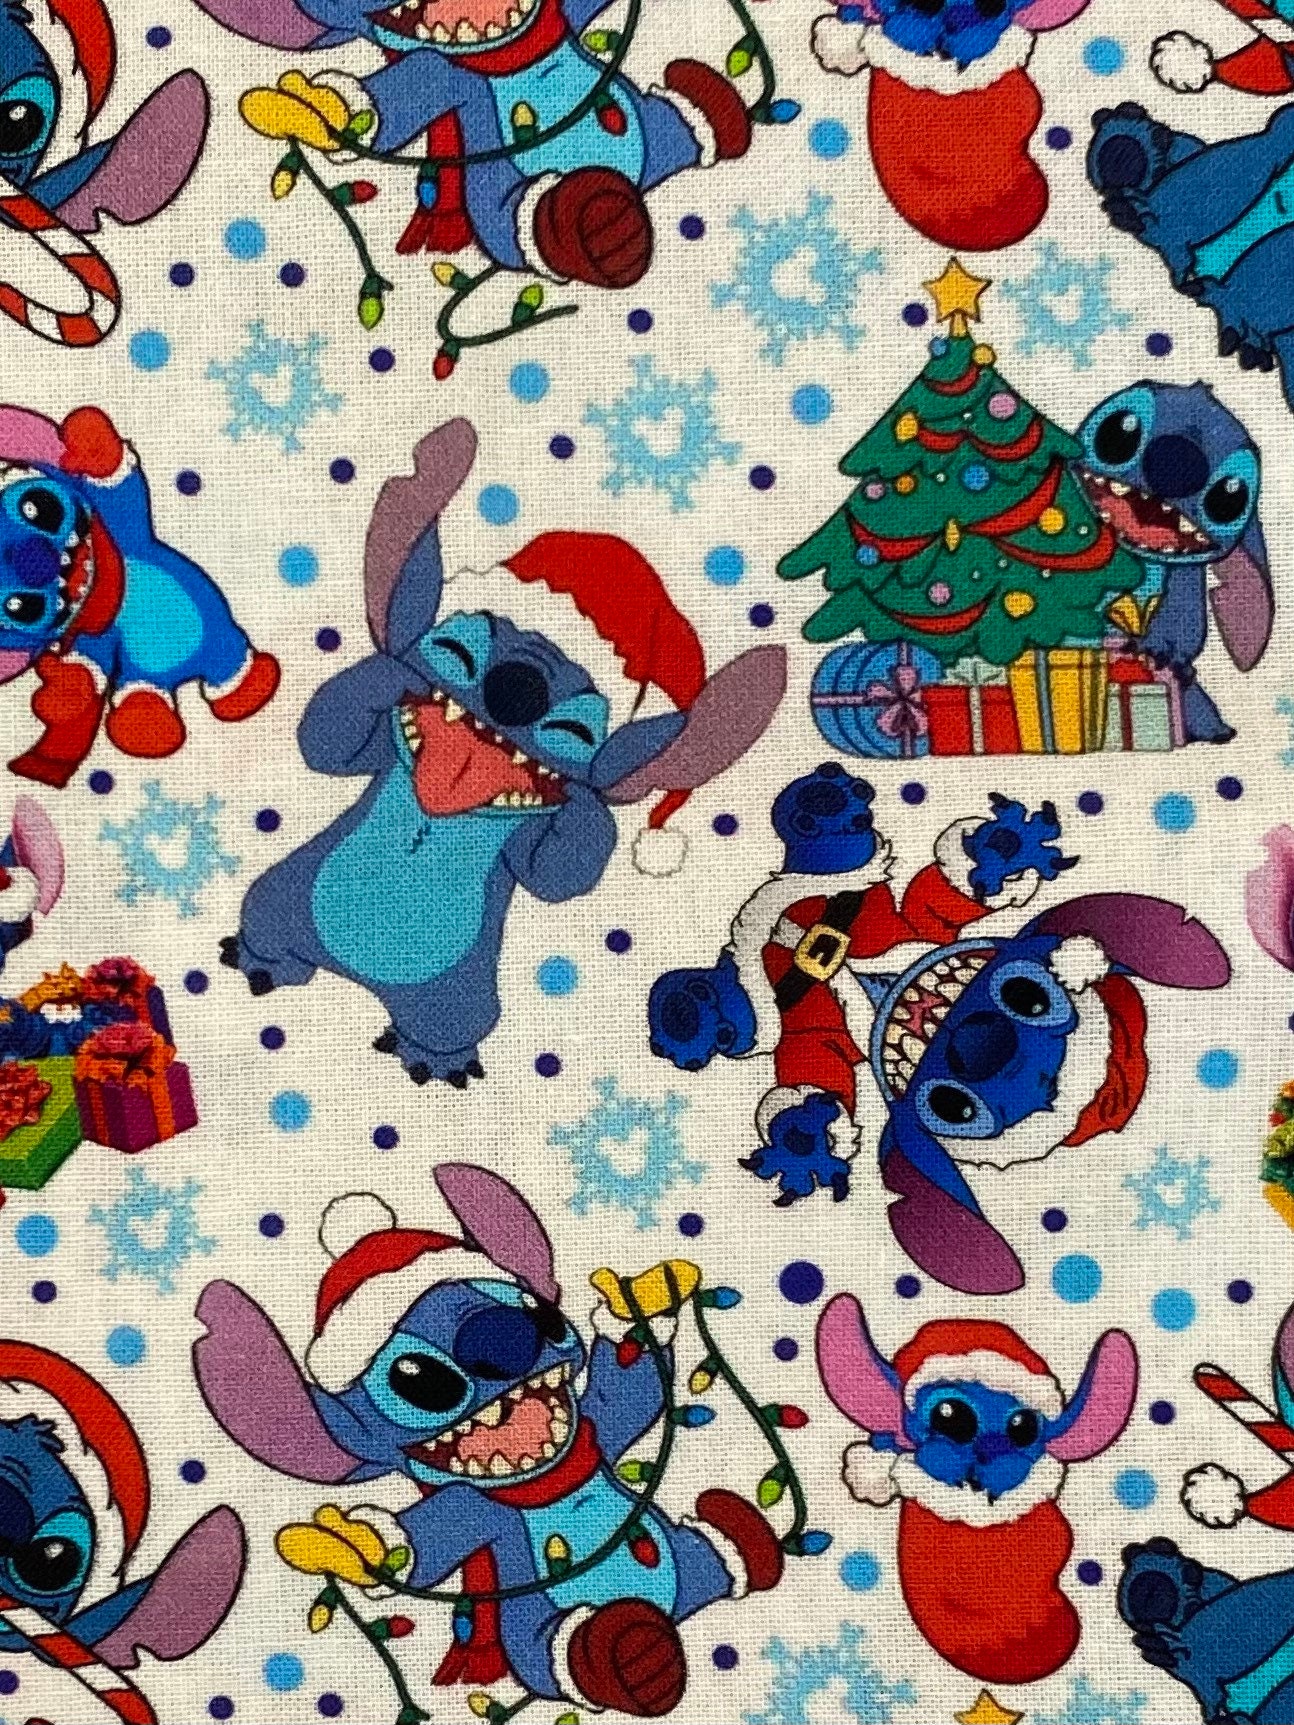 Stitch Wrapping Paper Sheets - Disney Lilo and Stitch Birthday Party Gift  Wrap Christmas Gift sold by Common Caril, SKU 40409584